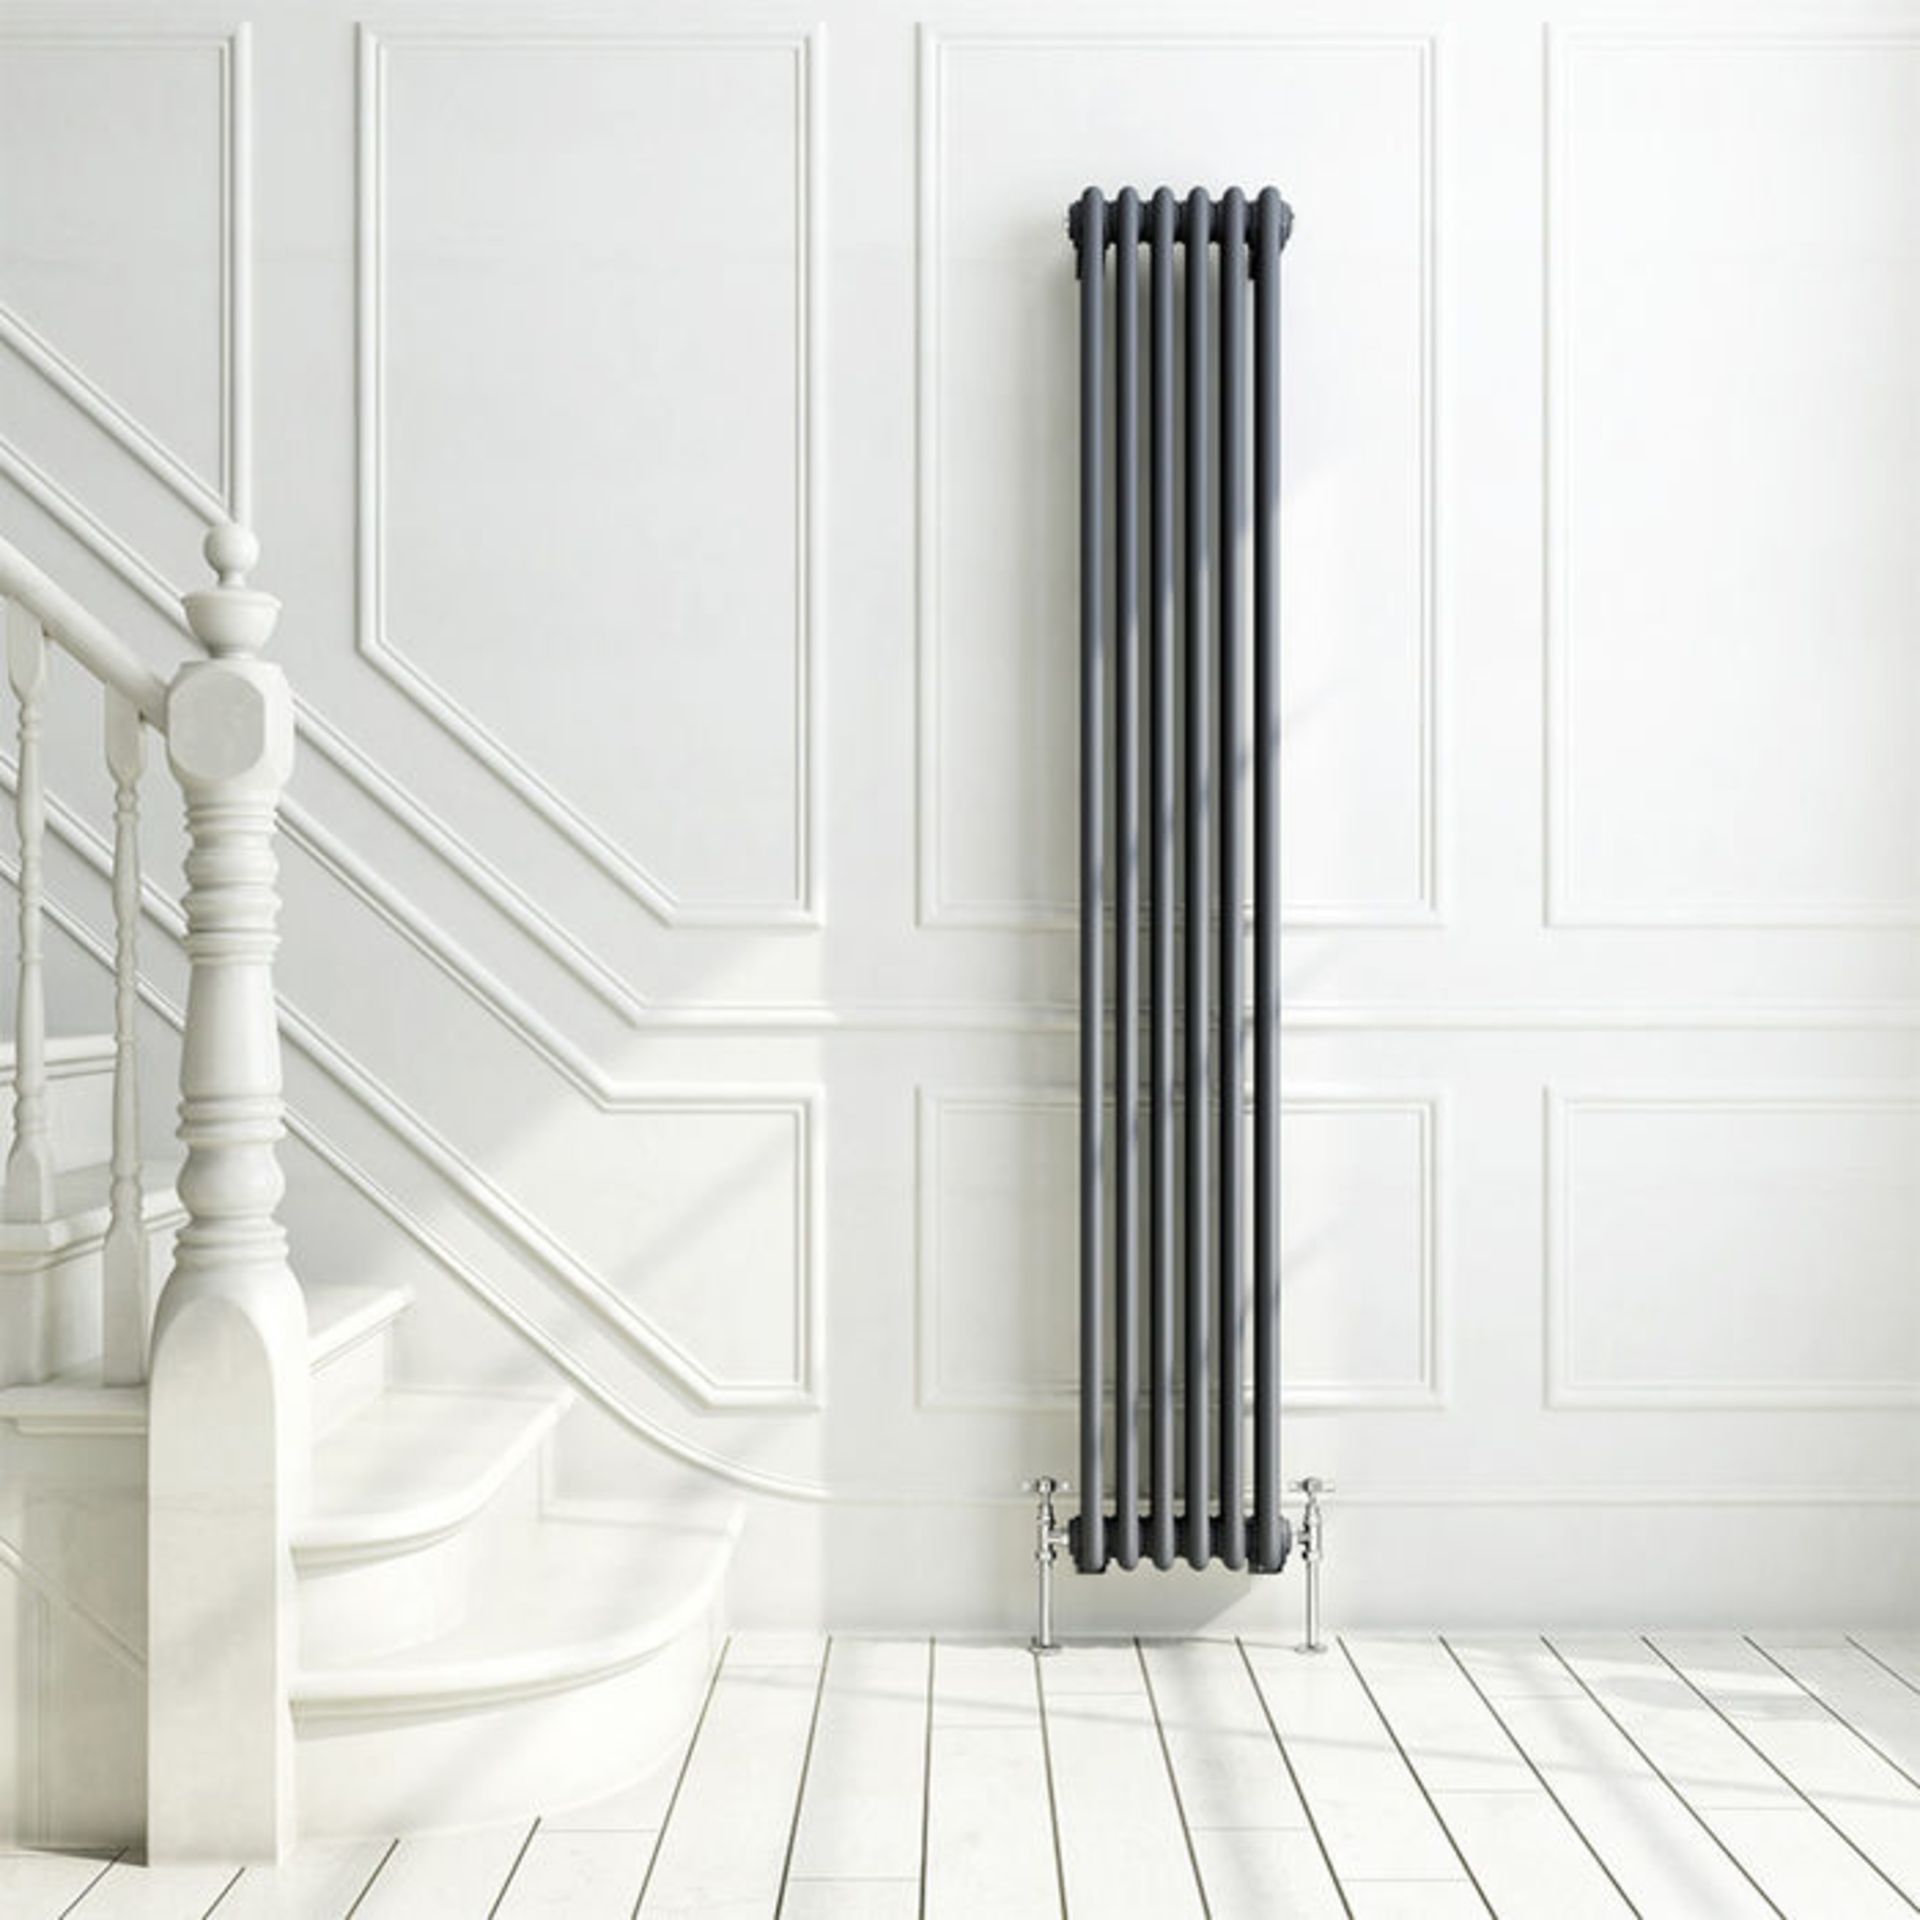 (AL183) 1800x290mm Anthracite Triple Panel Vertical Colosseum Traditional Radiator. RRP £499.99. - Image 3 of 4